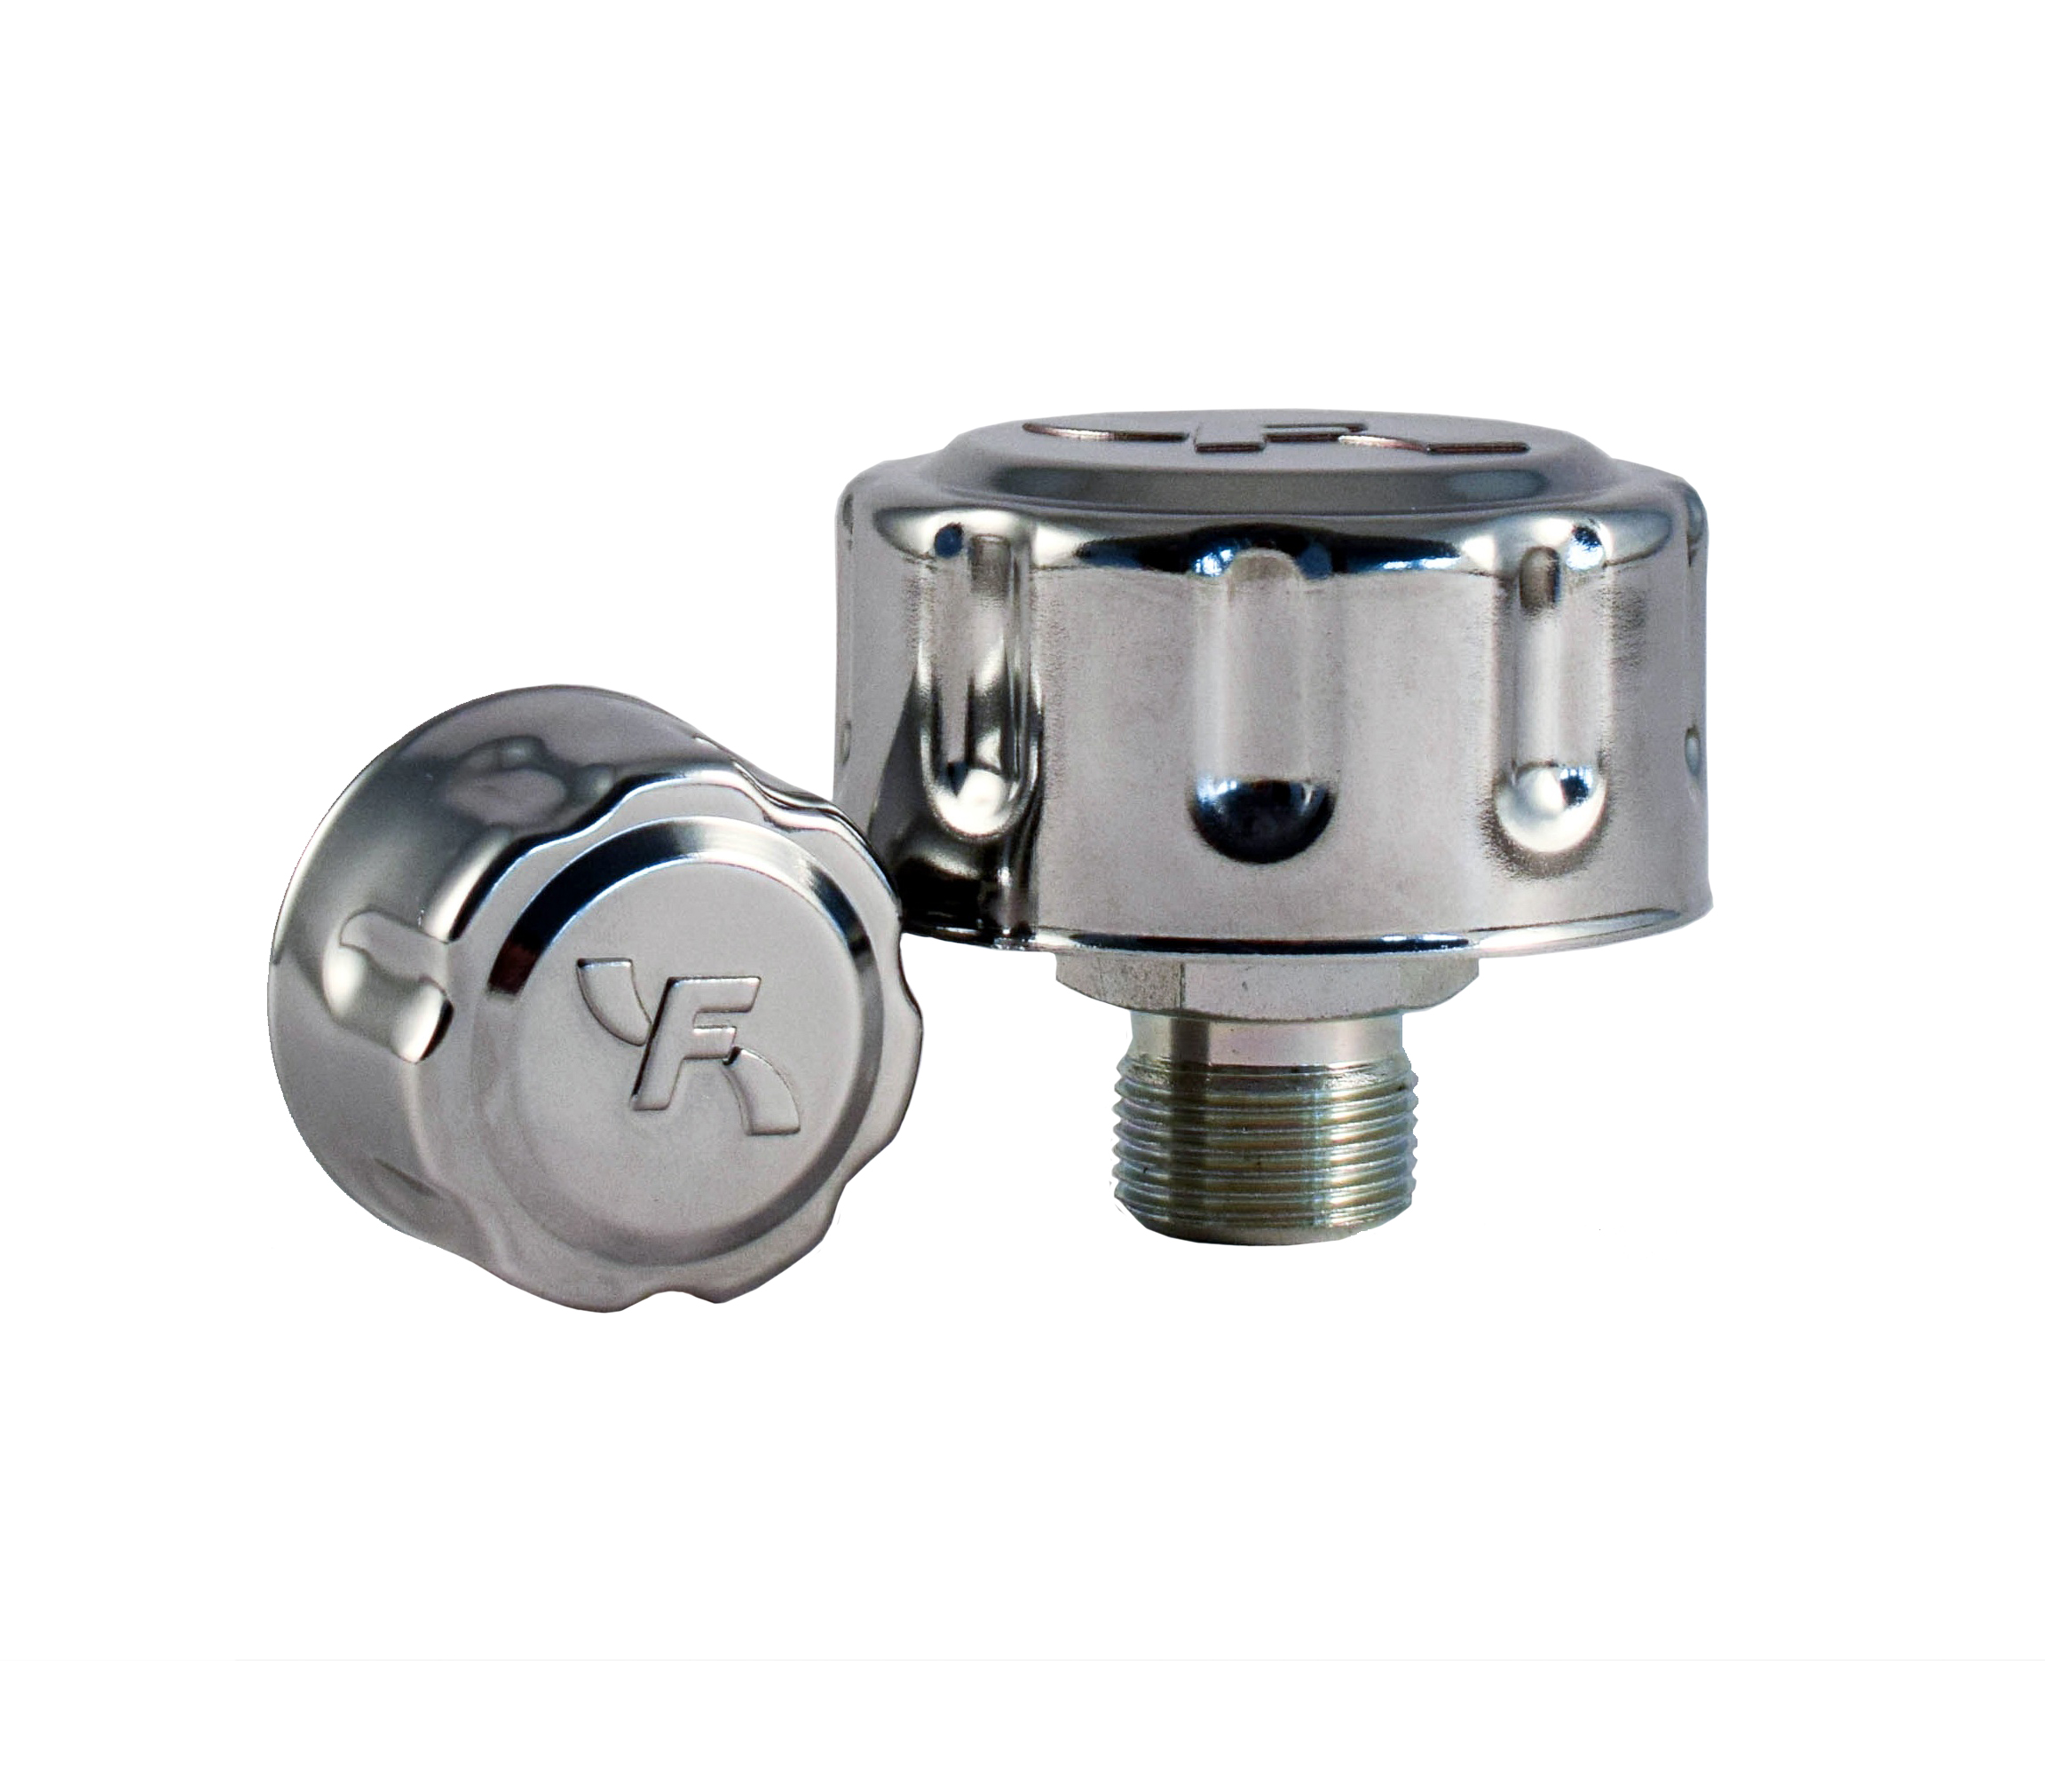 Threaded Breather, Cap Only, 1/2" BSP, 10 Micron, No Pressure Valve